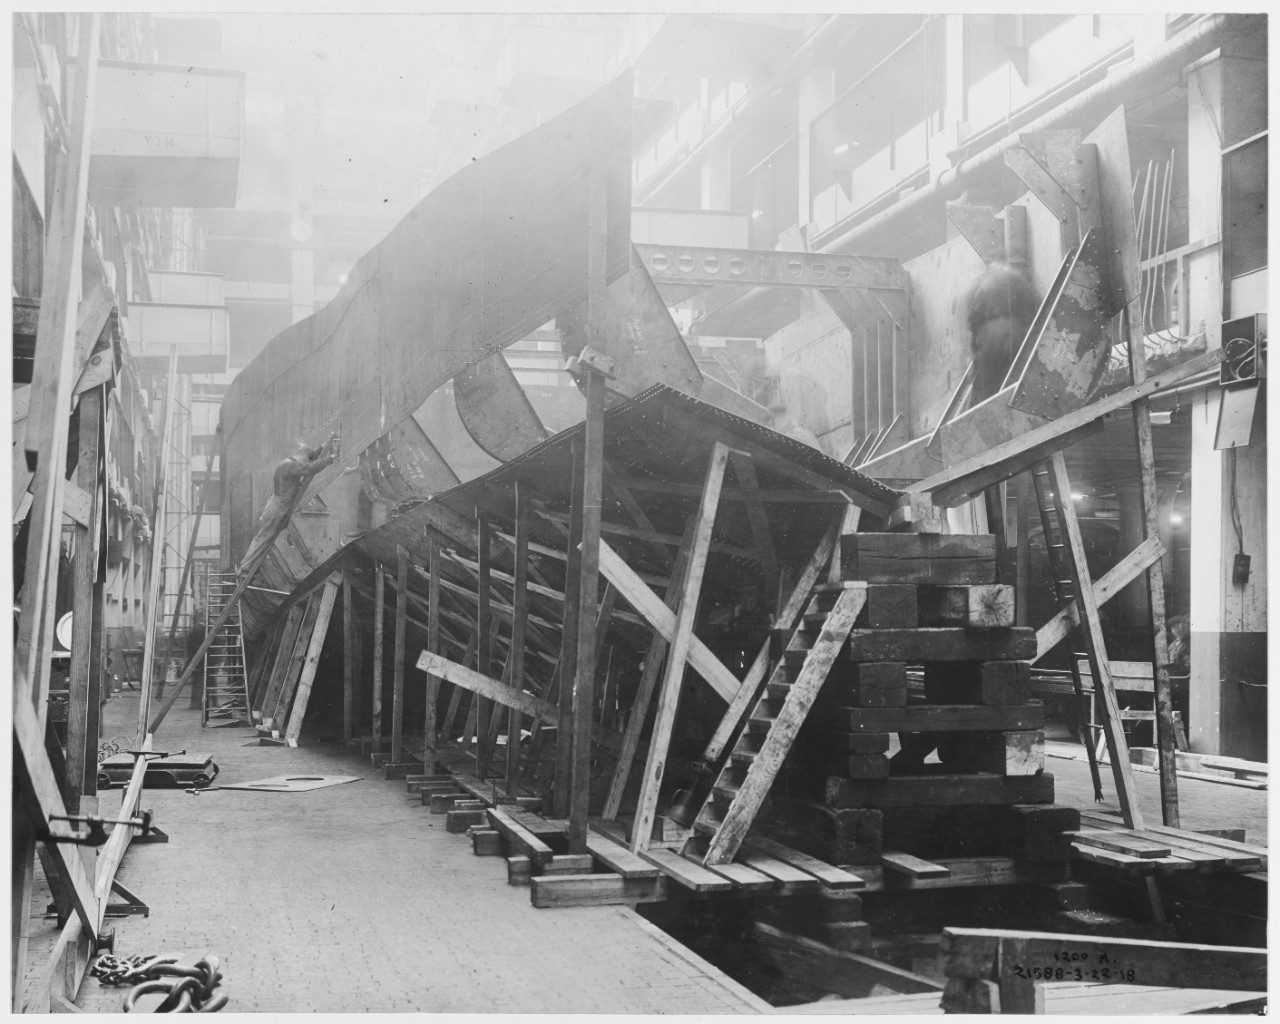 Construction of Ford Eagle Boats, Ford Motor Company, March 22, 1918